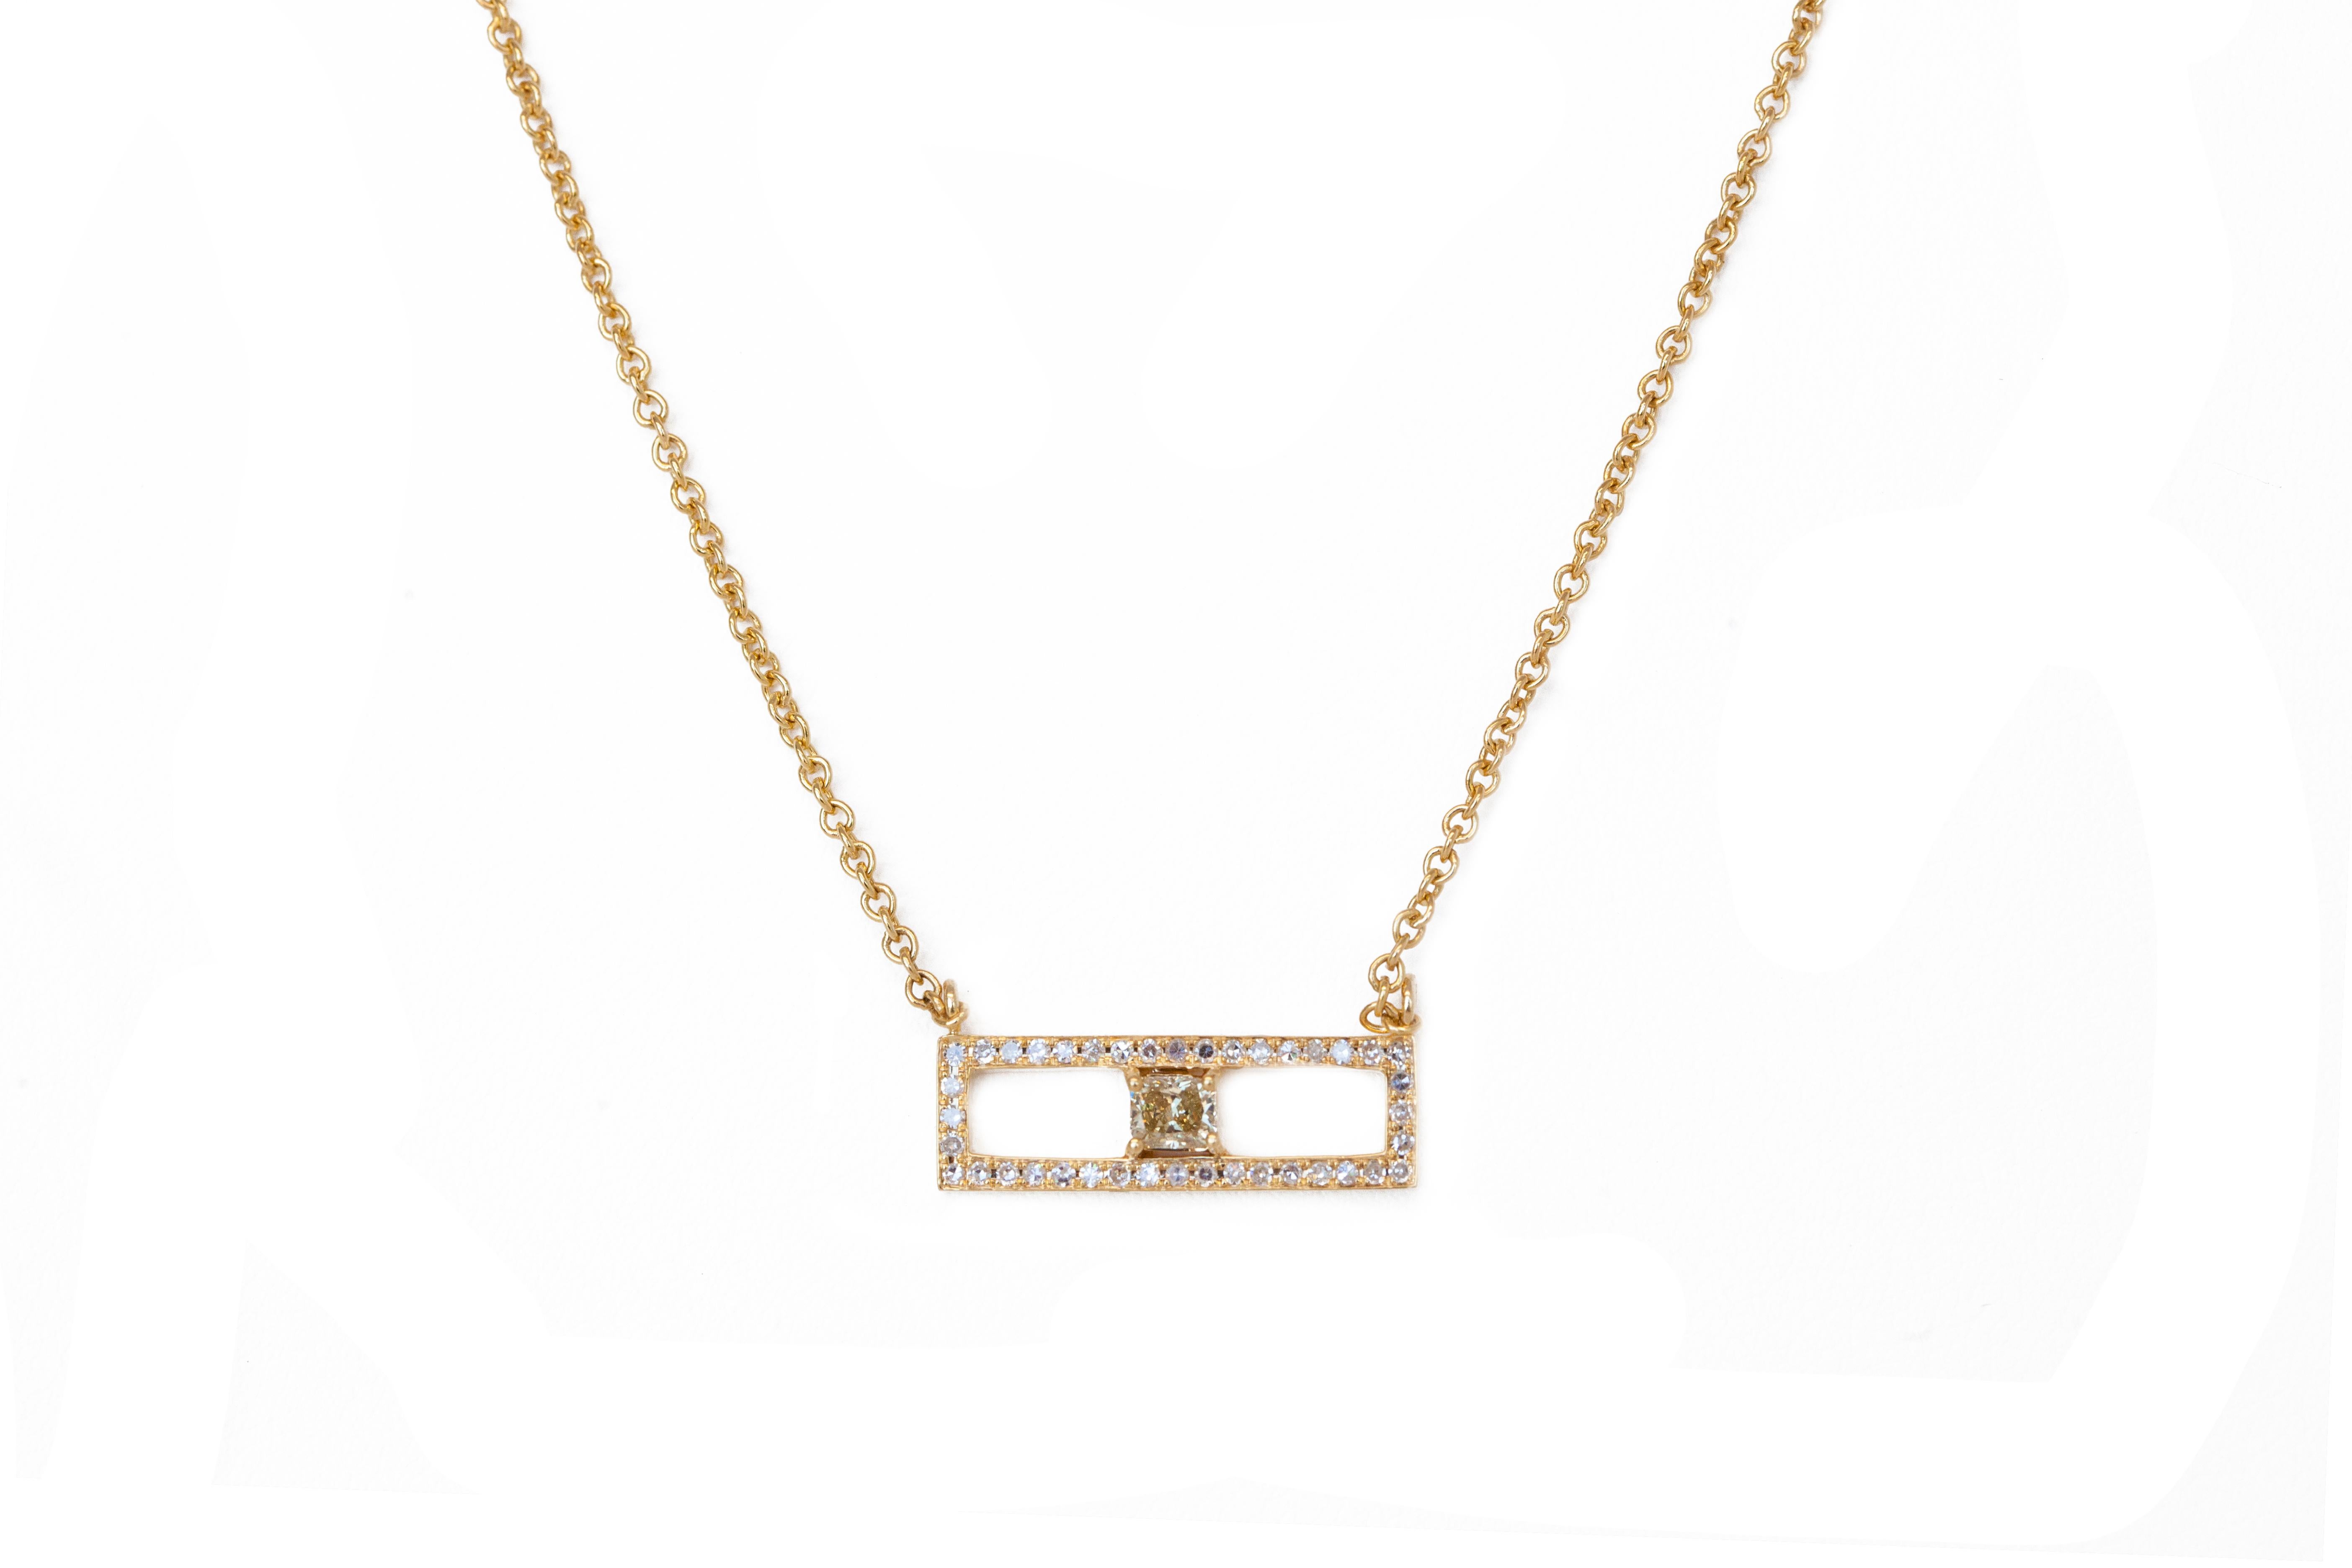 Rectangular diamond bar necklace with fancy colored diamond in 18k white gold.
